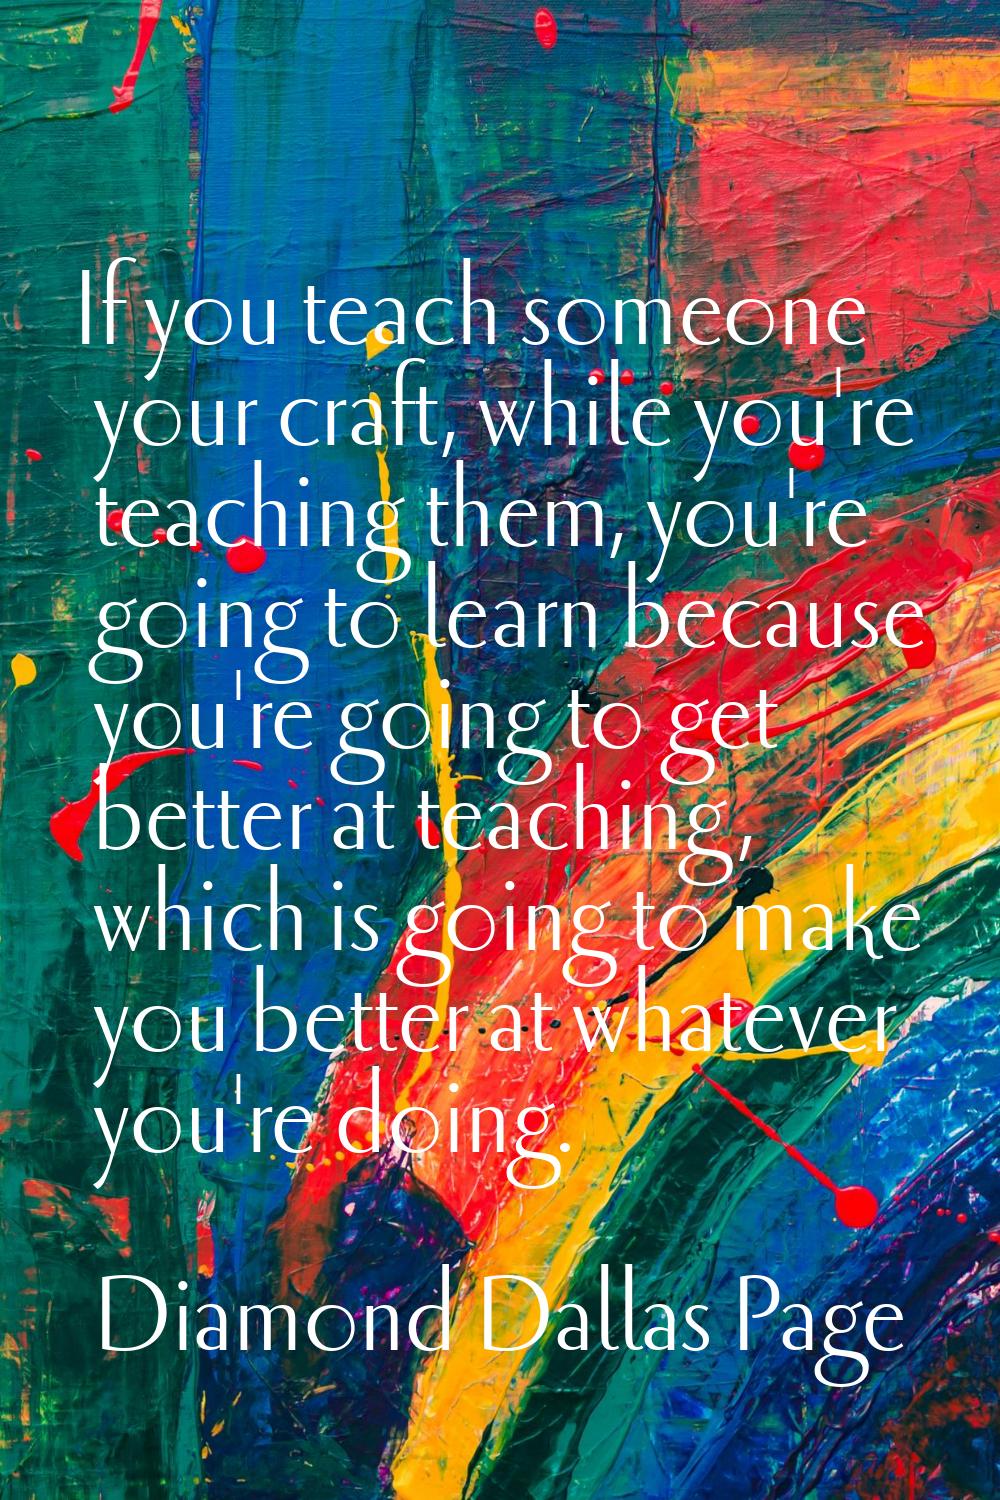 If you teach someone your craft, while you're teaching them, you're going to learn because you're g